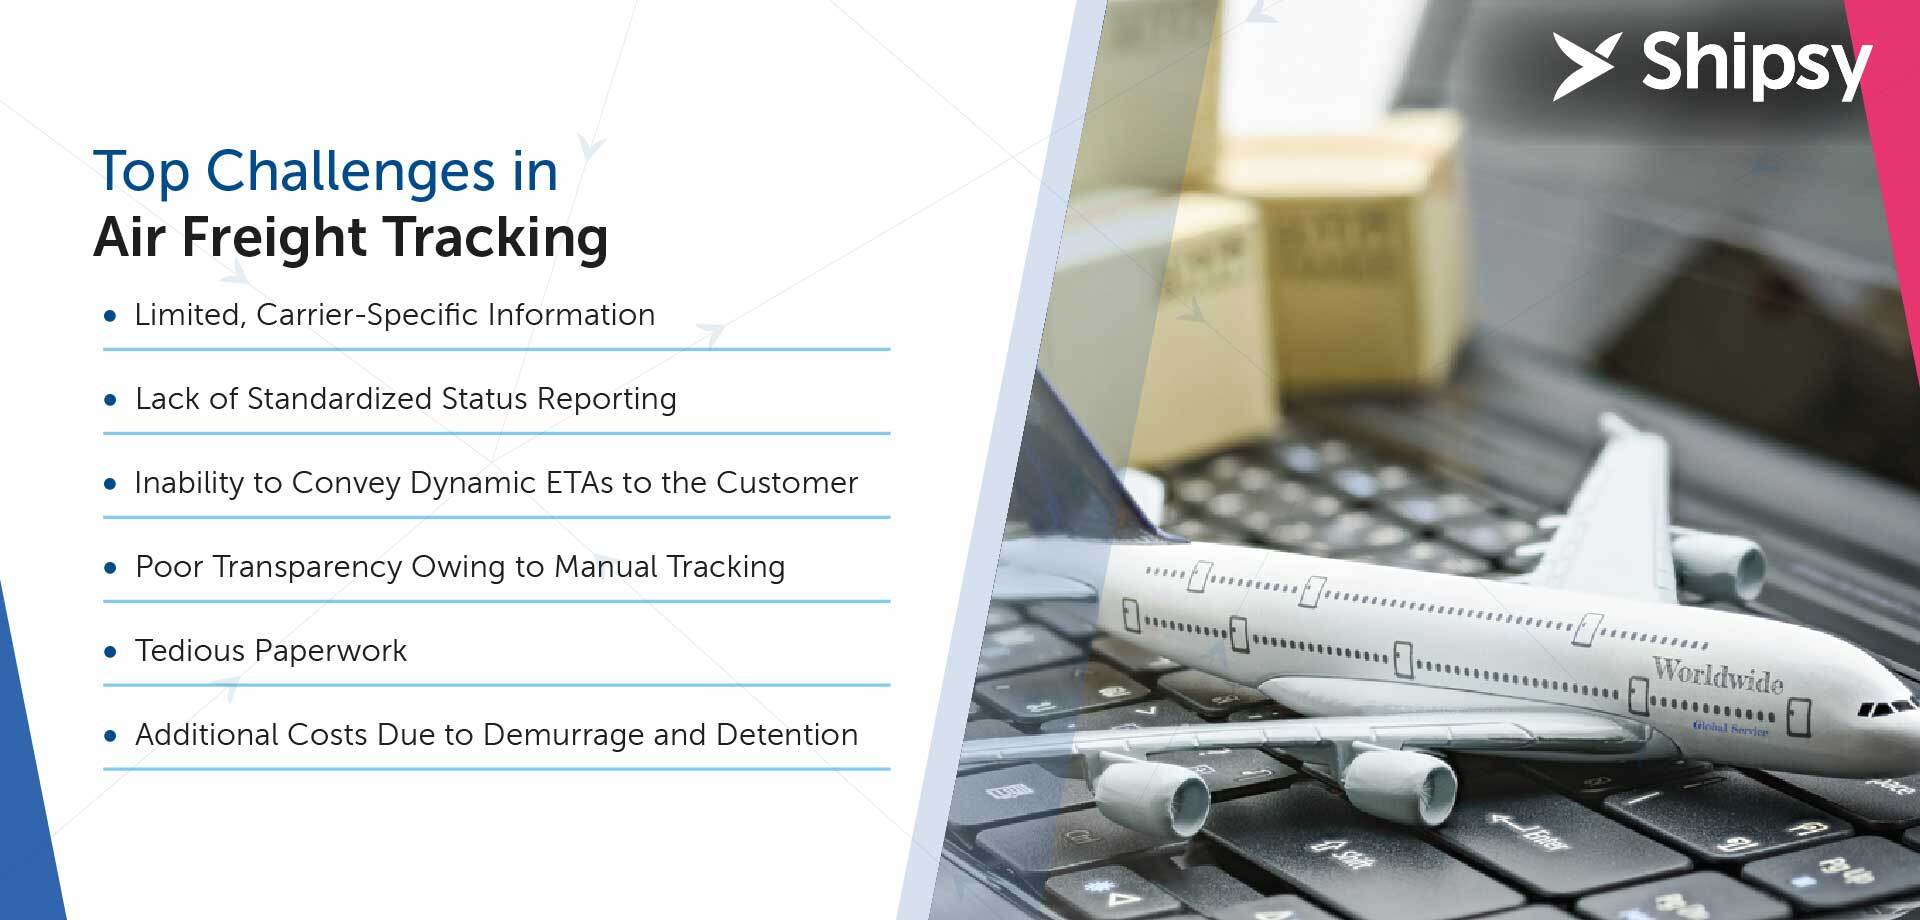 Air freight tracking challenges